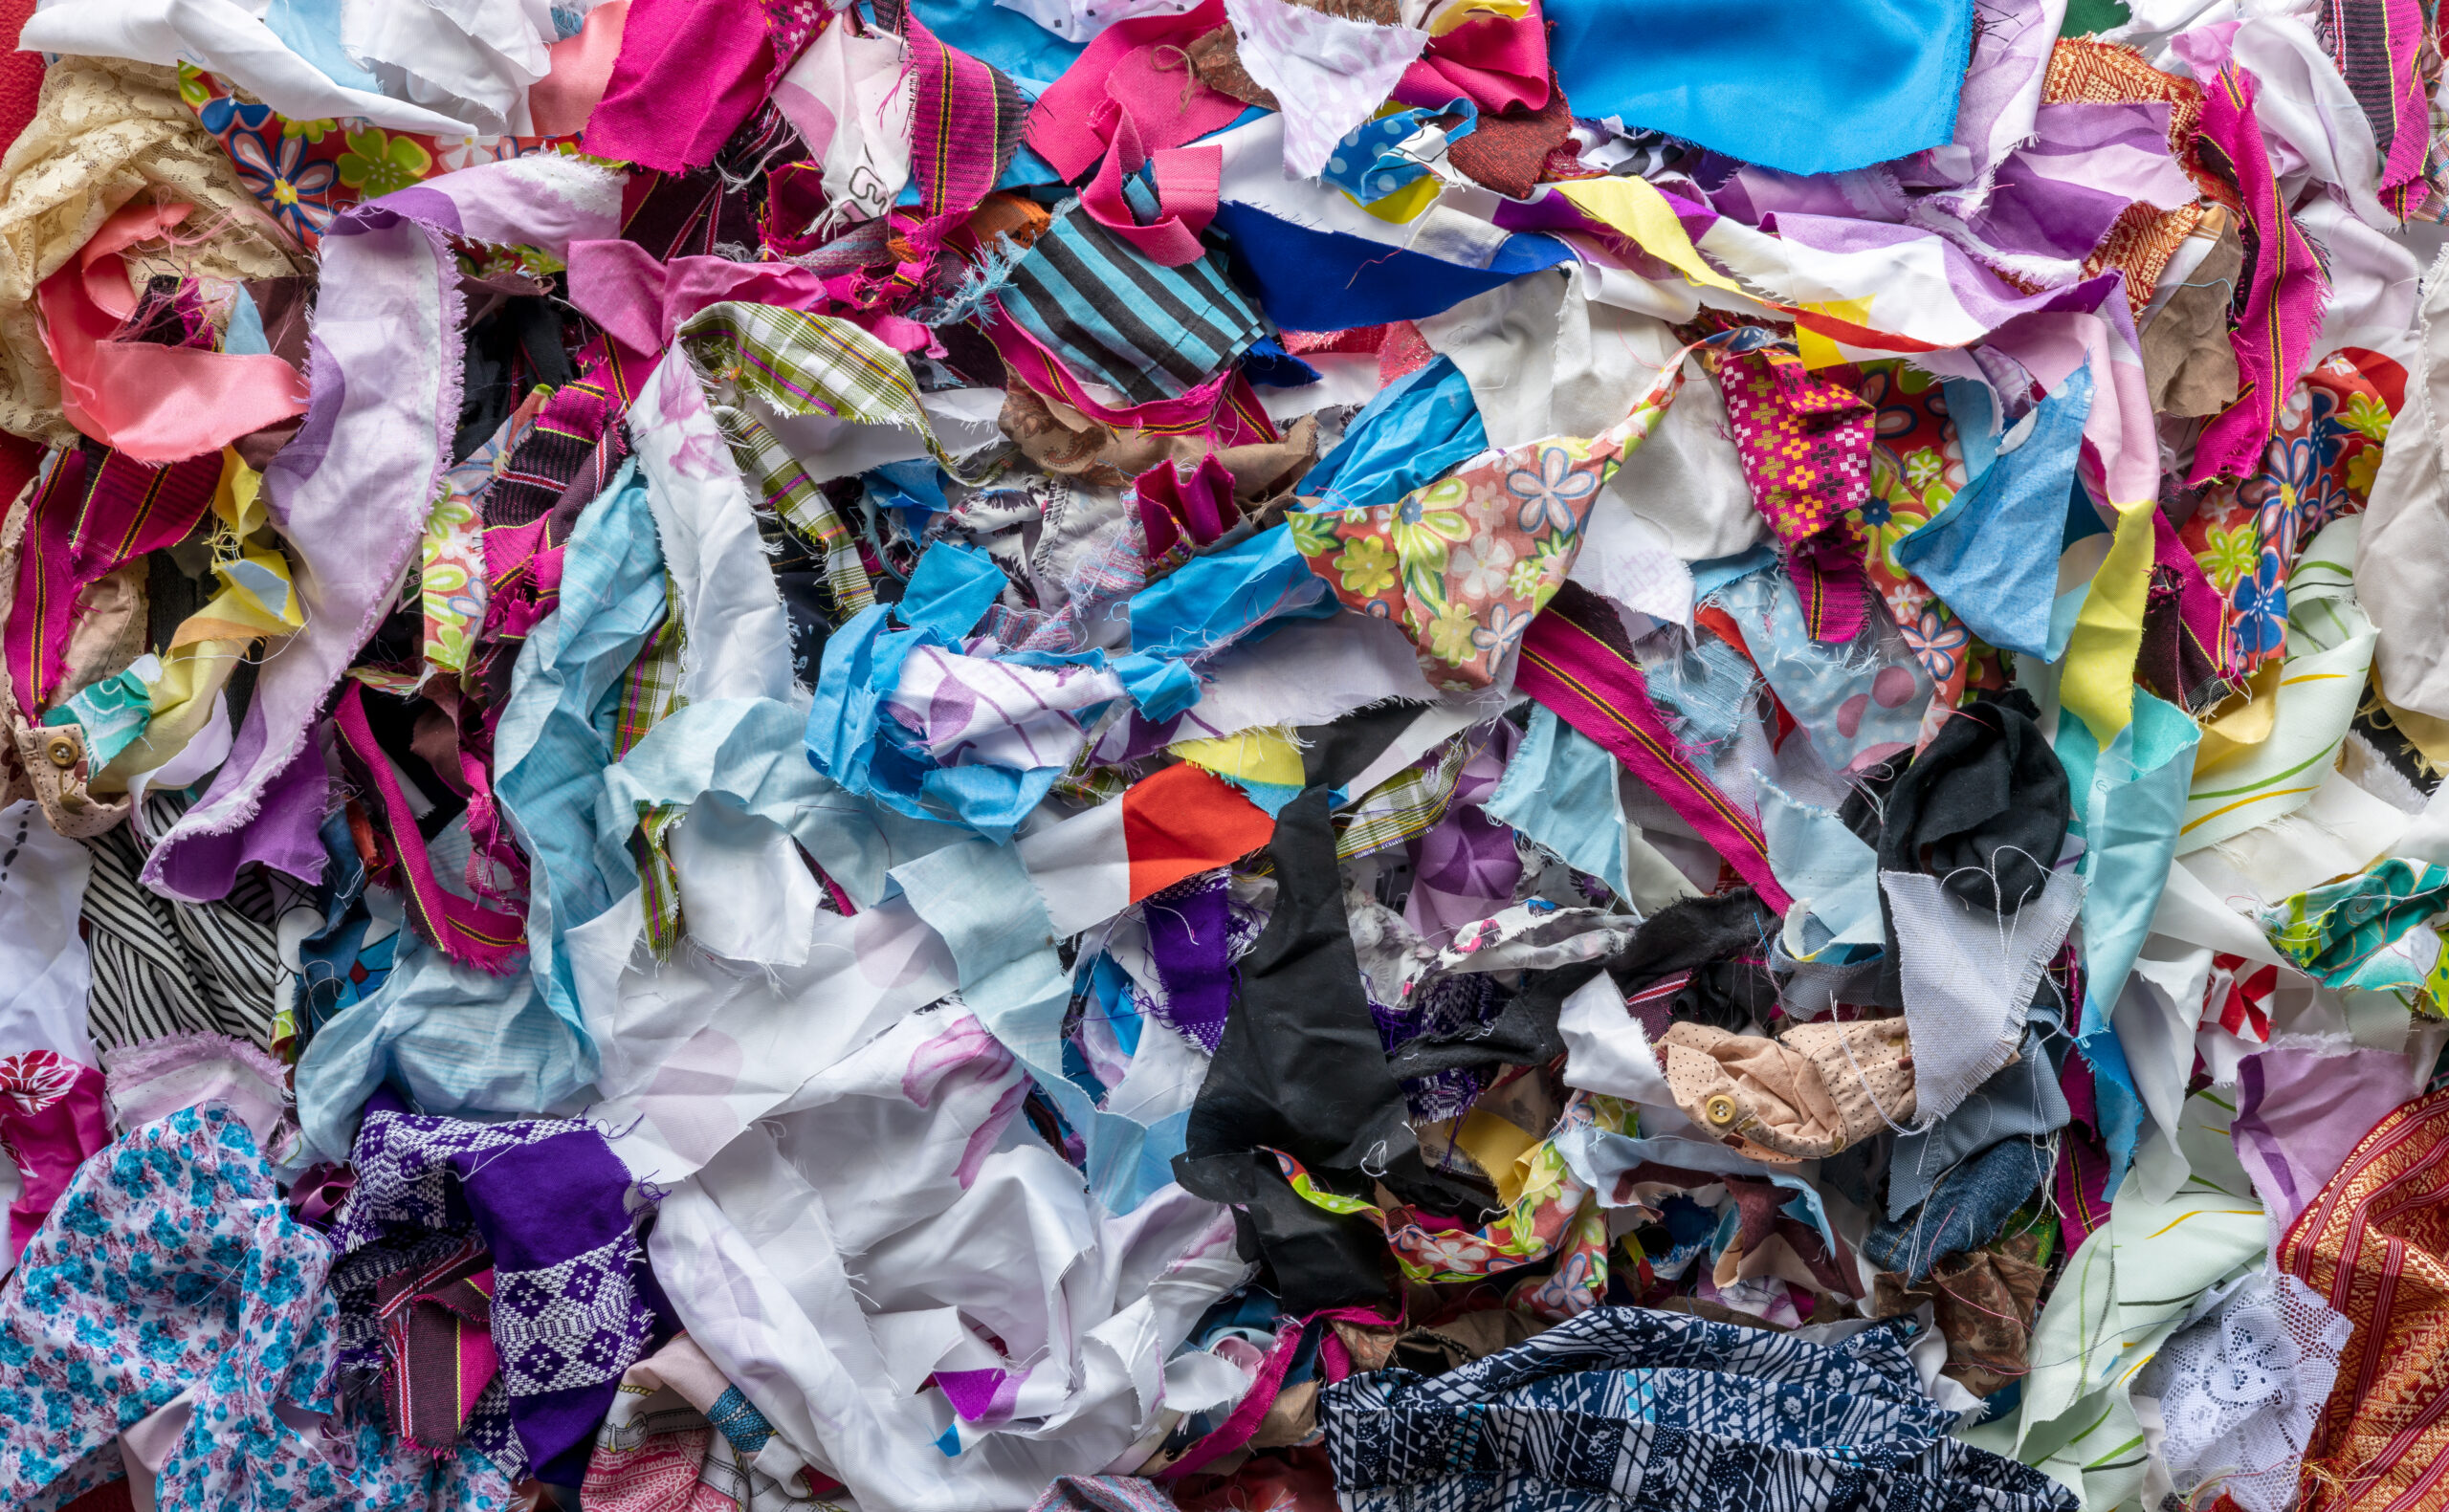 How municipalities and producers have been preparing for new EU waste textile regulations